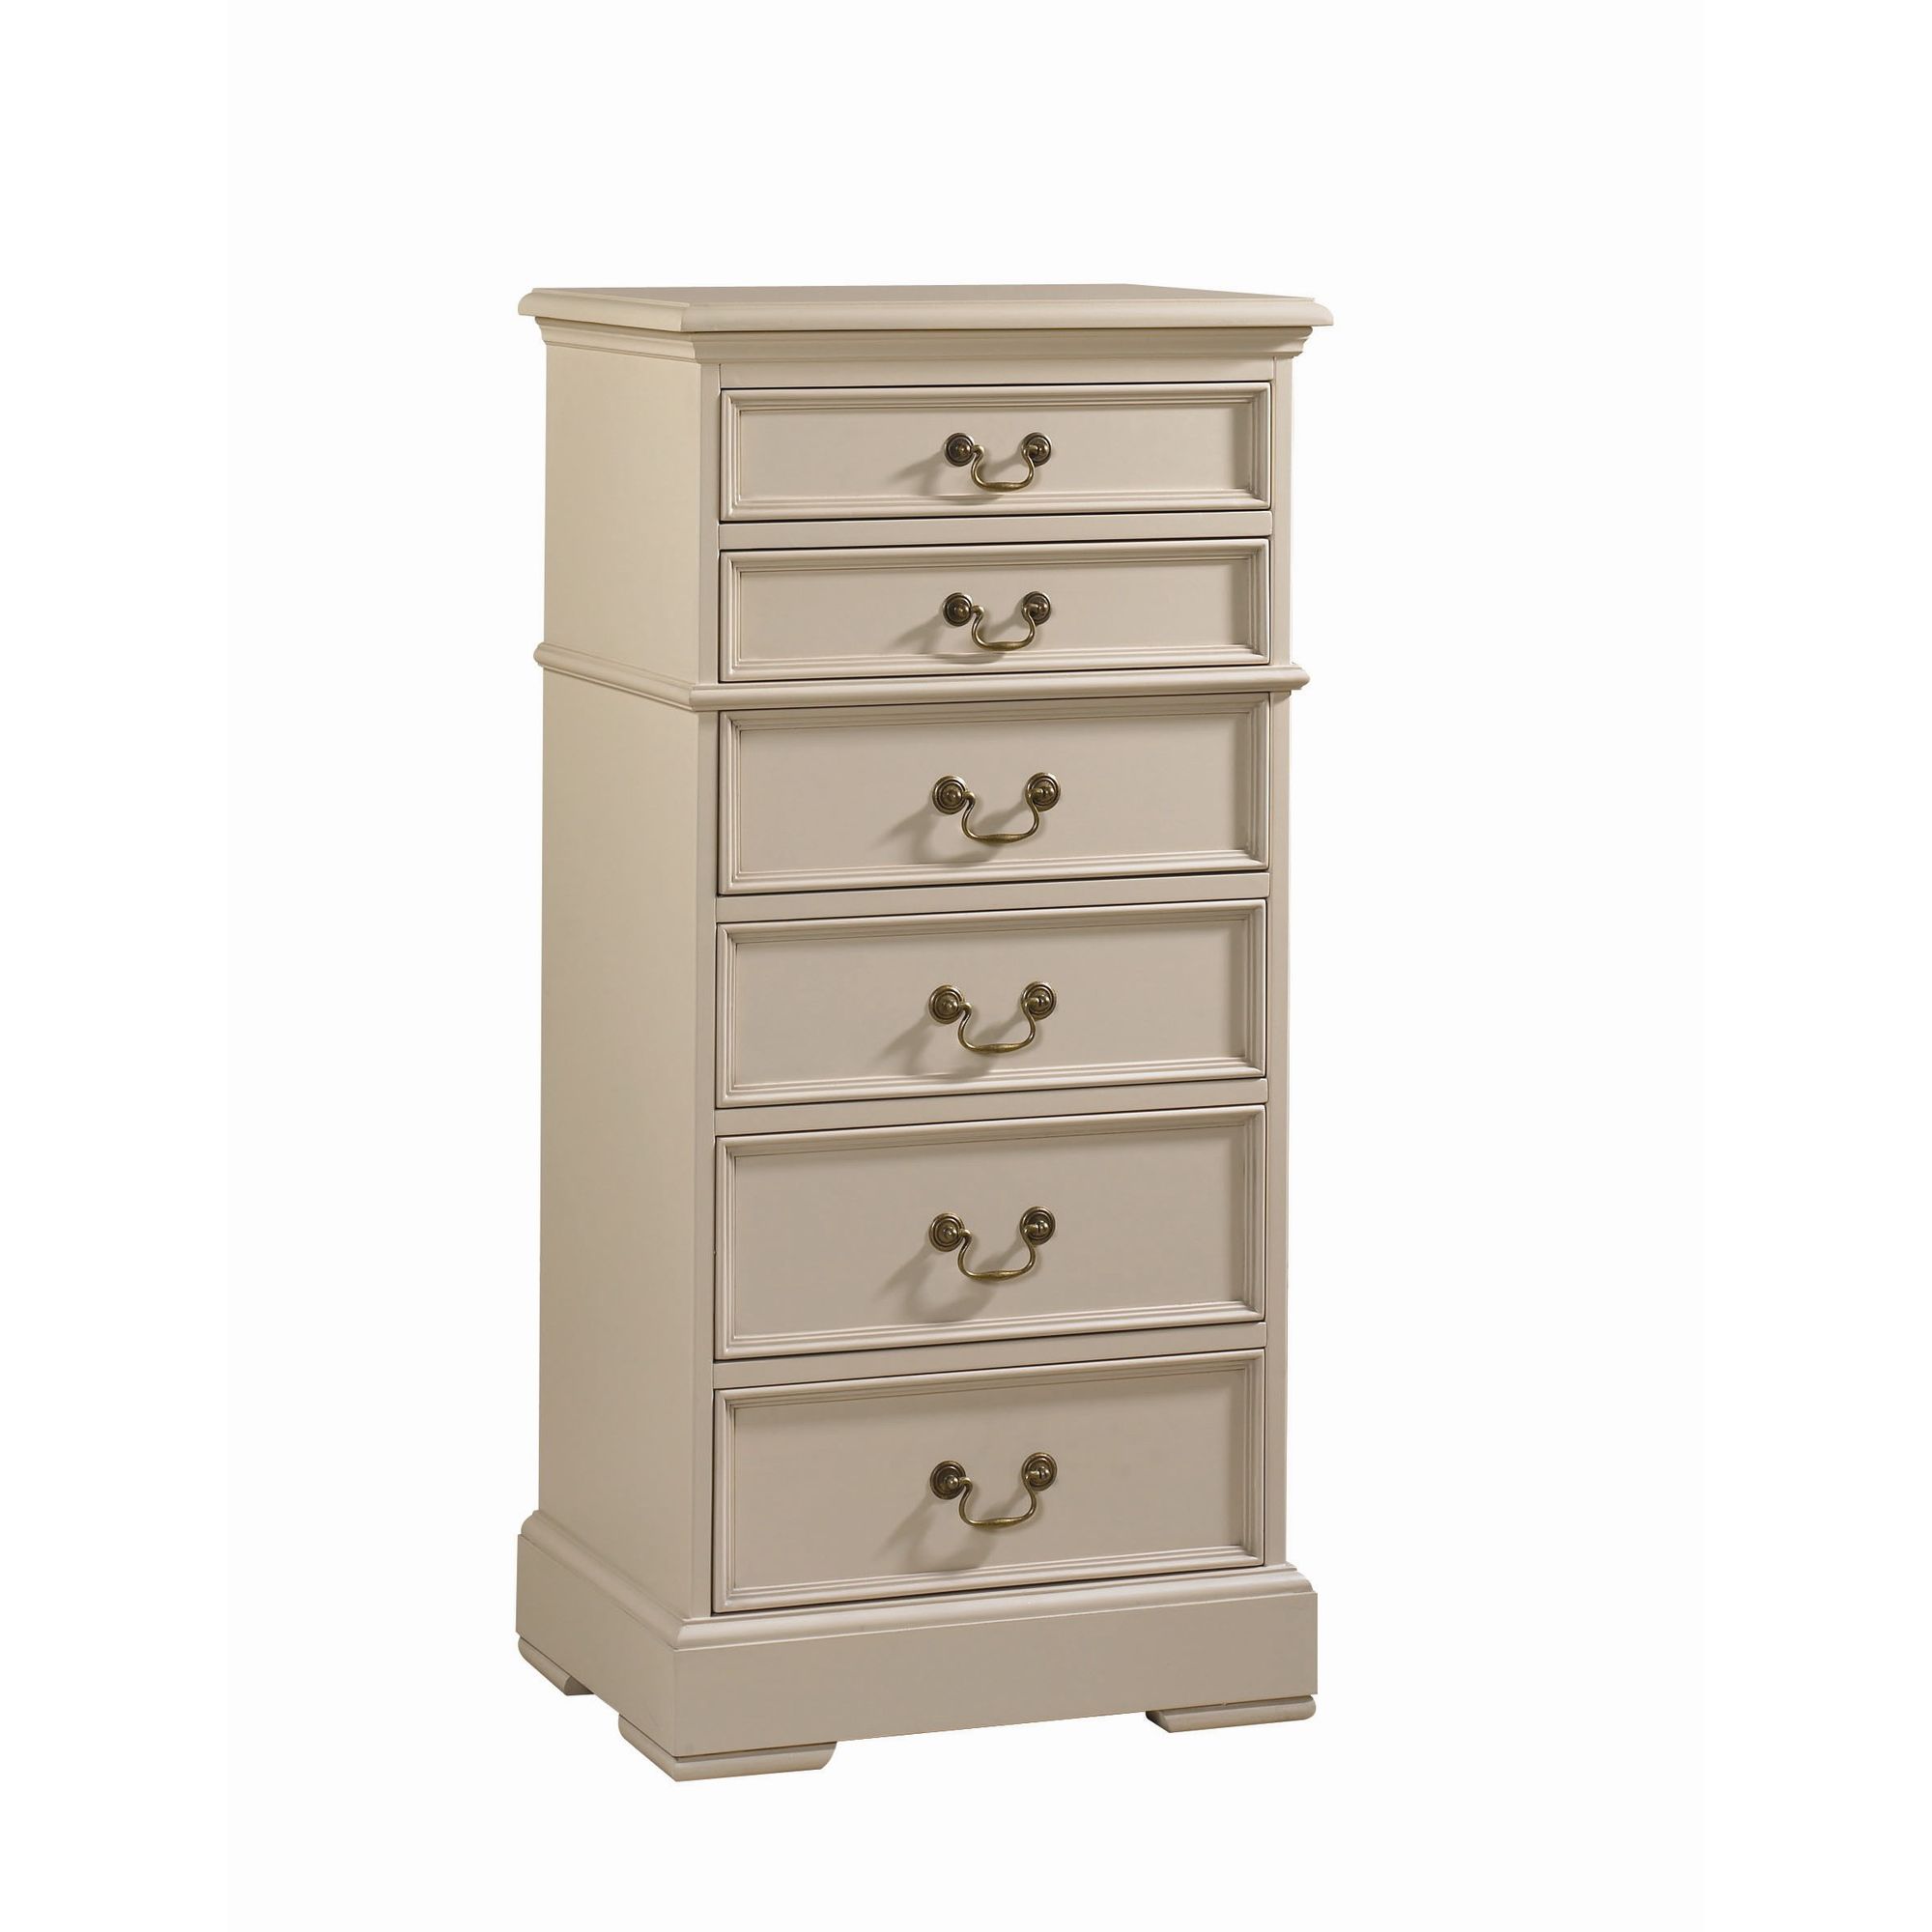 YP Furniture Country House Six Drawer Tall Chest - Ivory at Tesco Direct